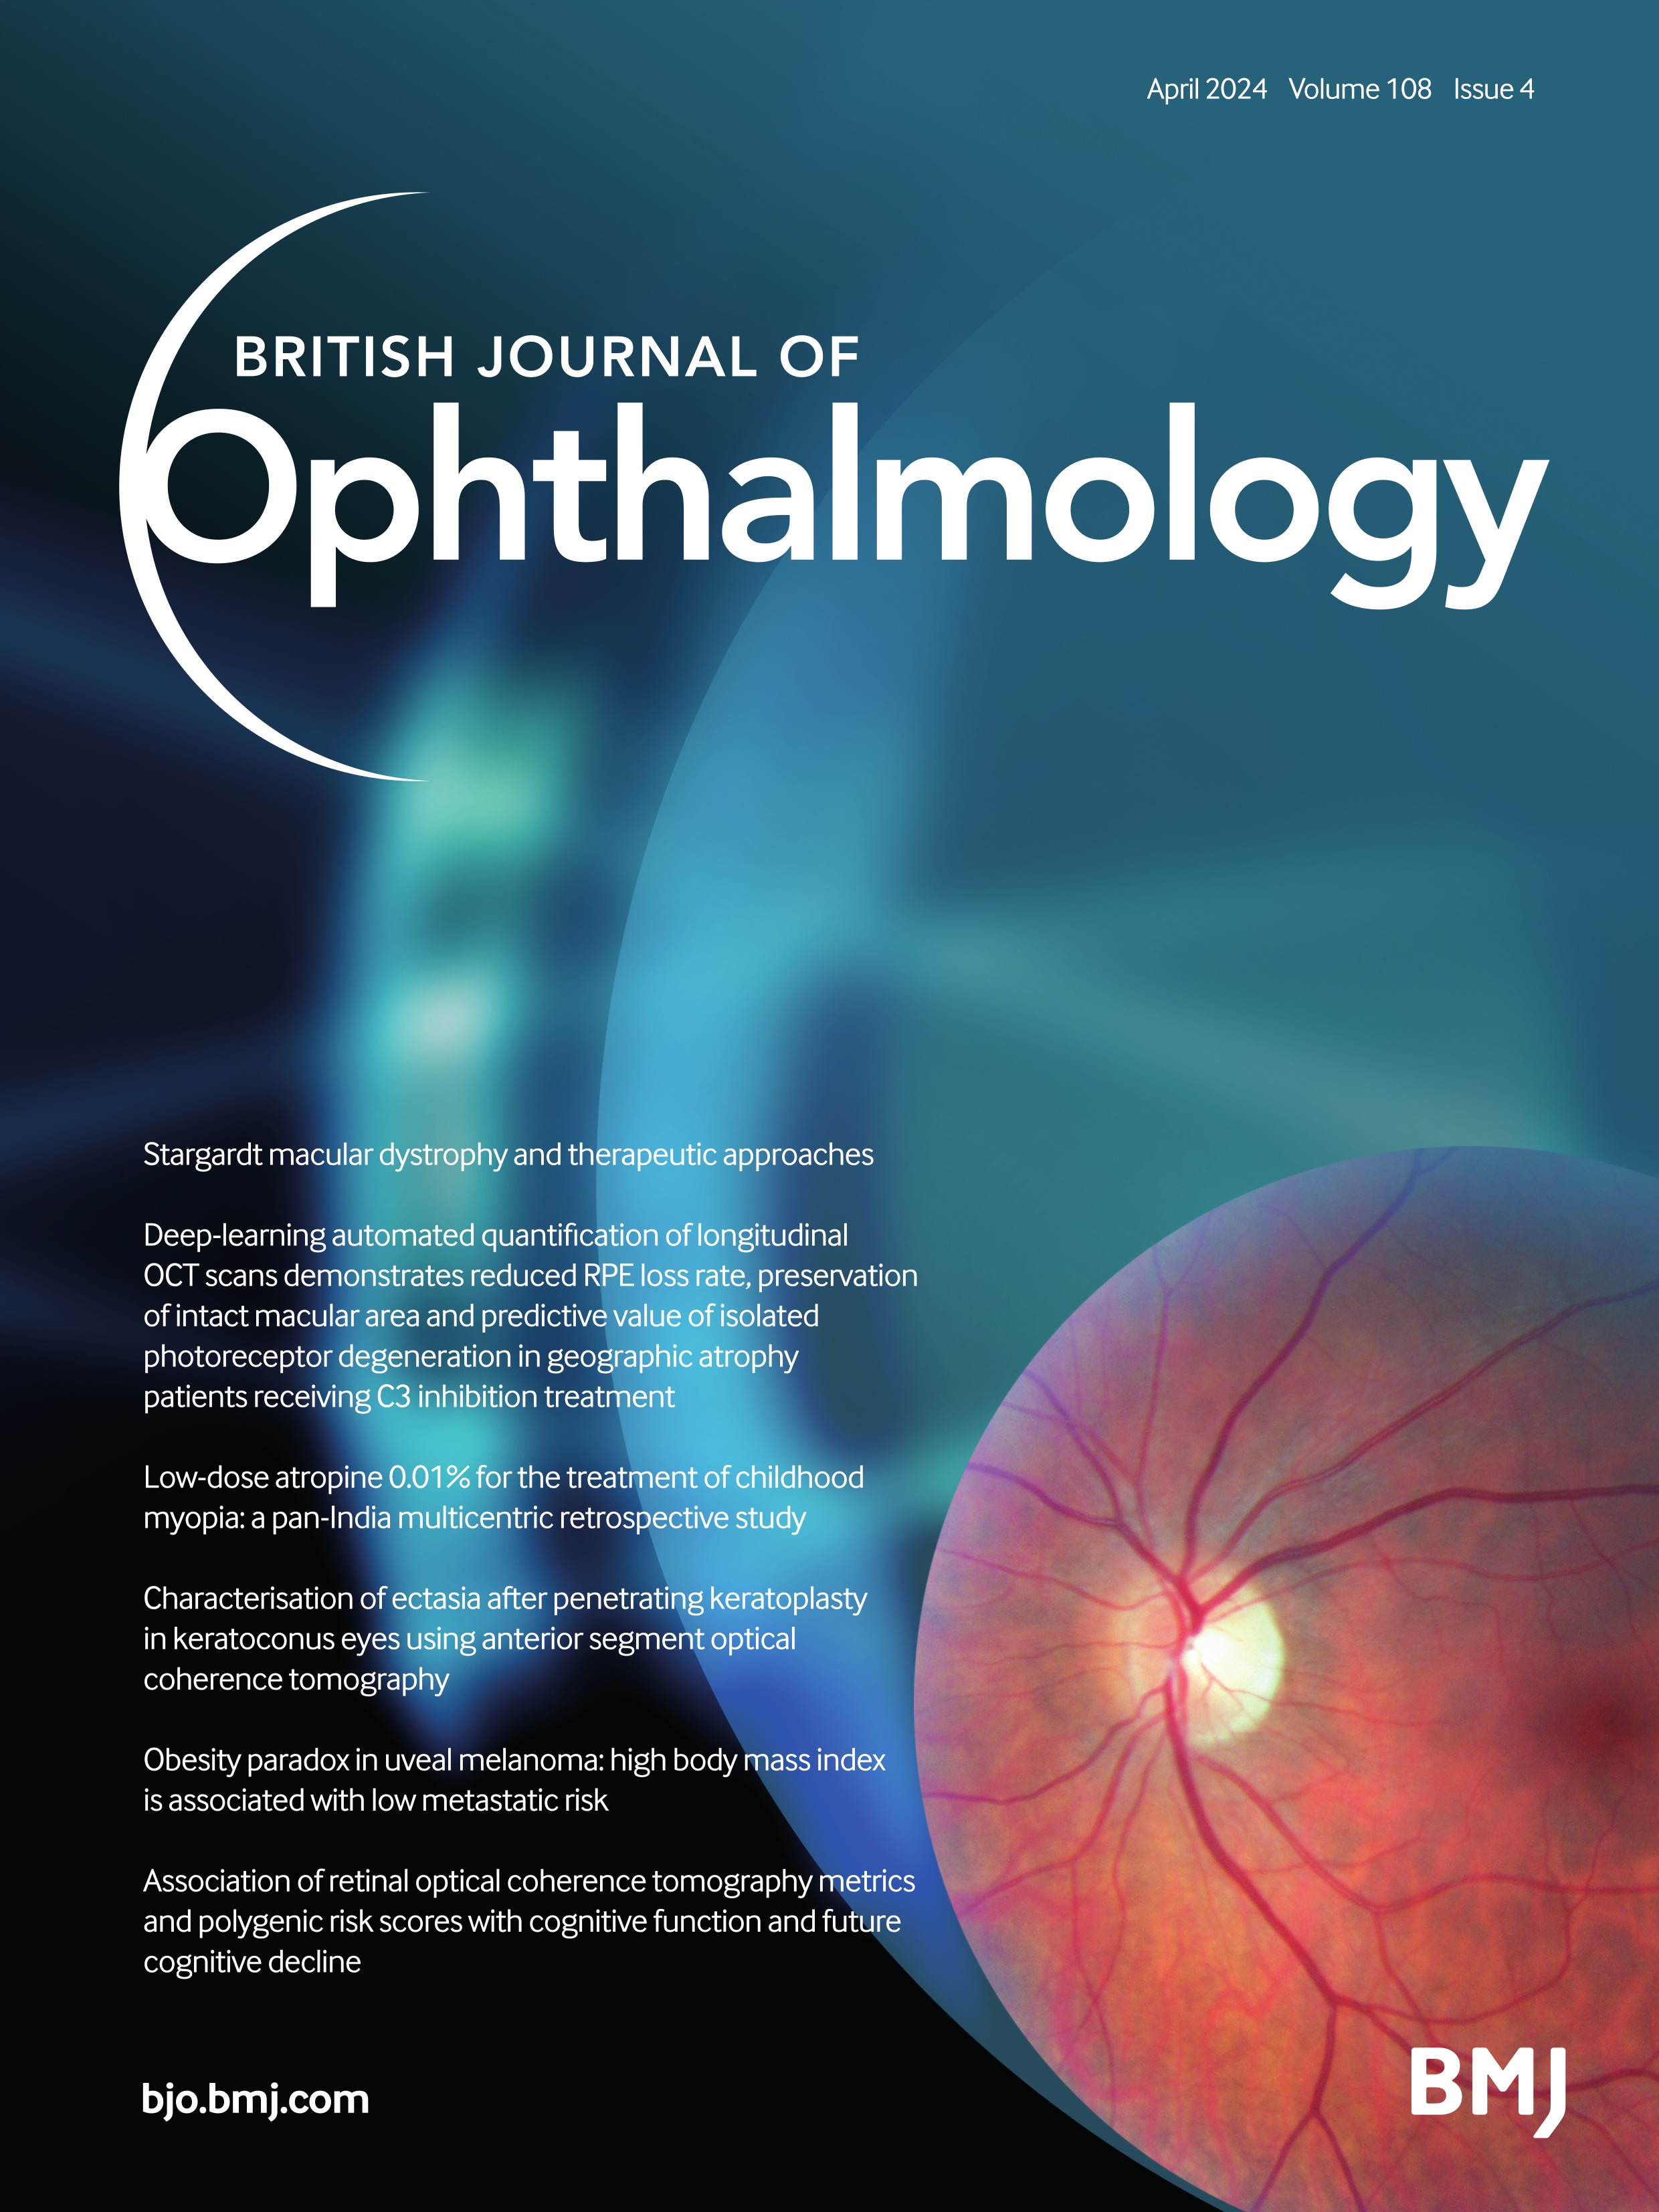 Distribution and determinants of choroidal vascularity index in healthy eyes from deep-learning choroidal analysis: a population-based SS-OCT study